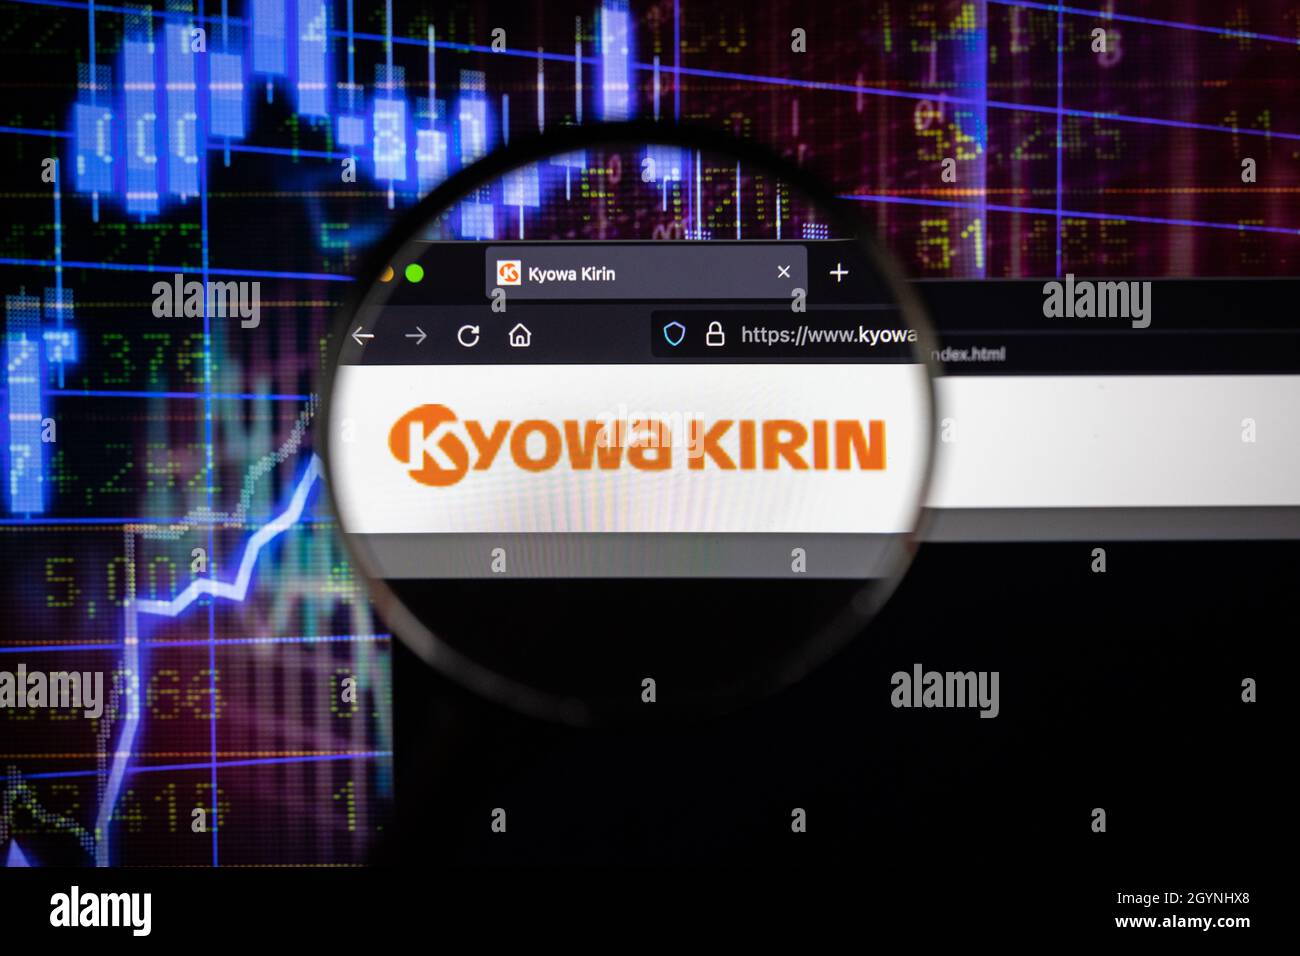 Kyowa Kirin company logo on a website with blurry stock market developments in the background, seen on a computer screen through a magnifying glass Stock Photo